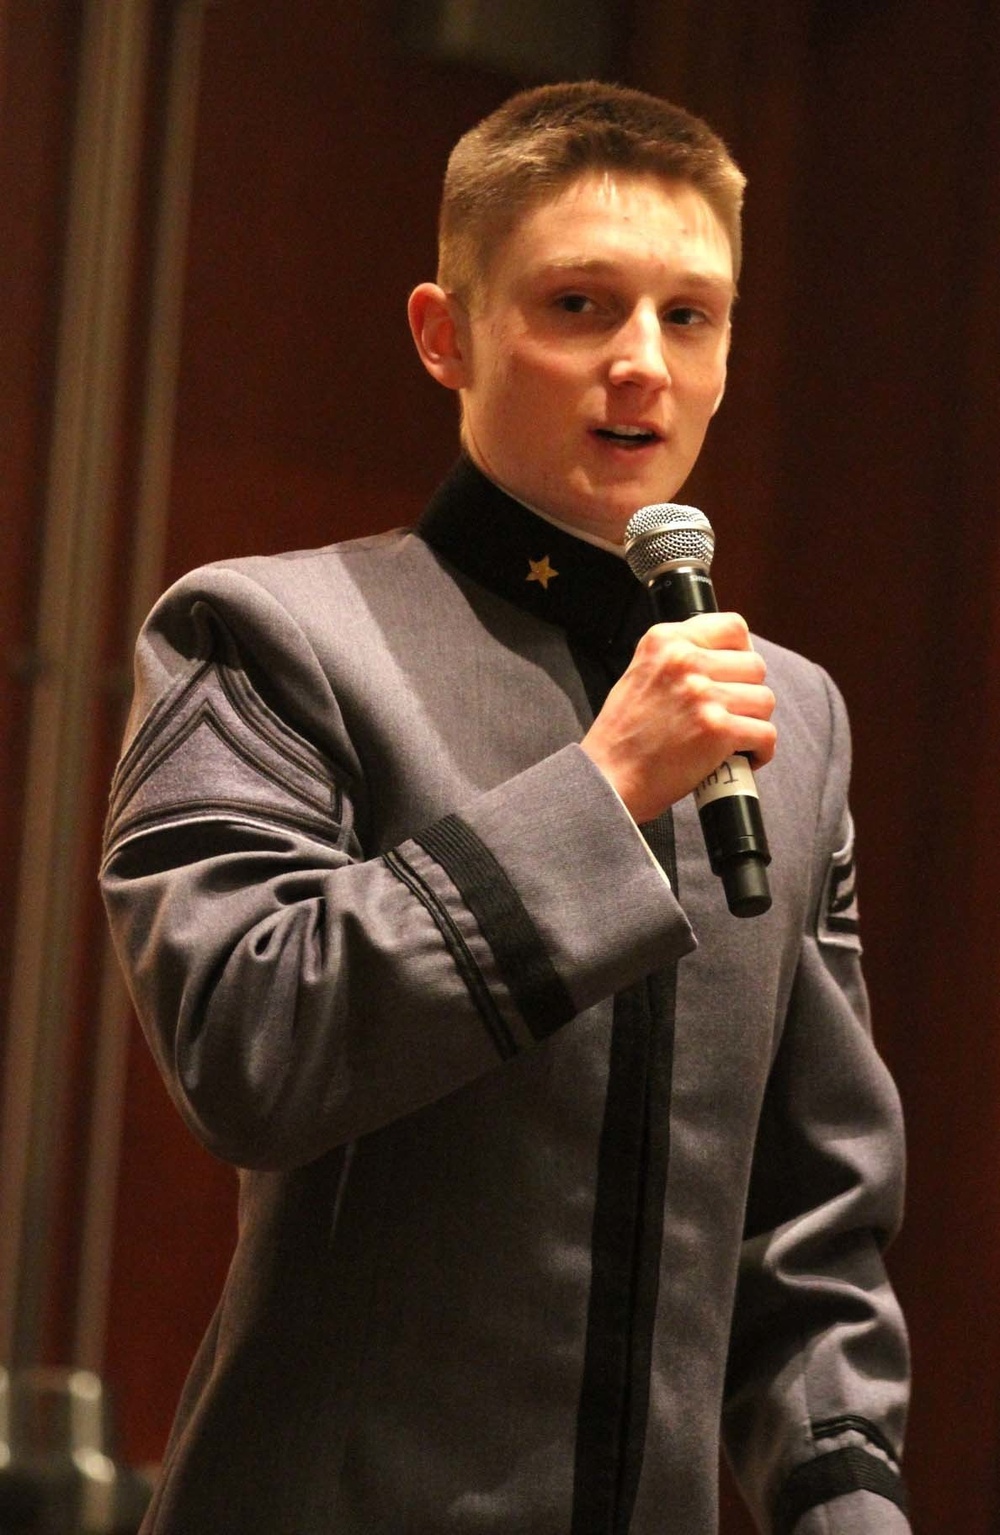 West Point cadet speaks to community leaders